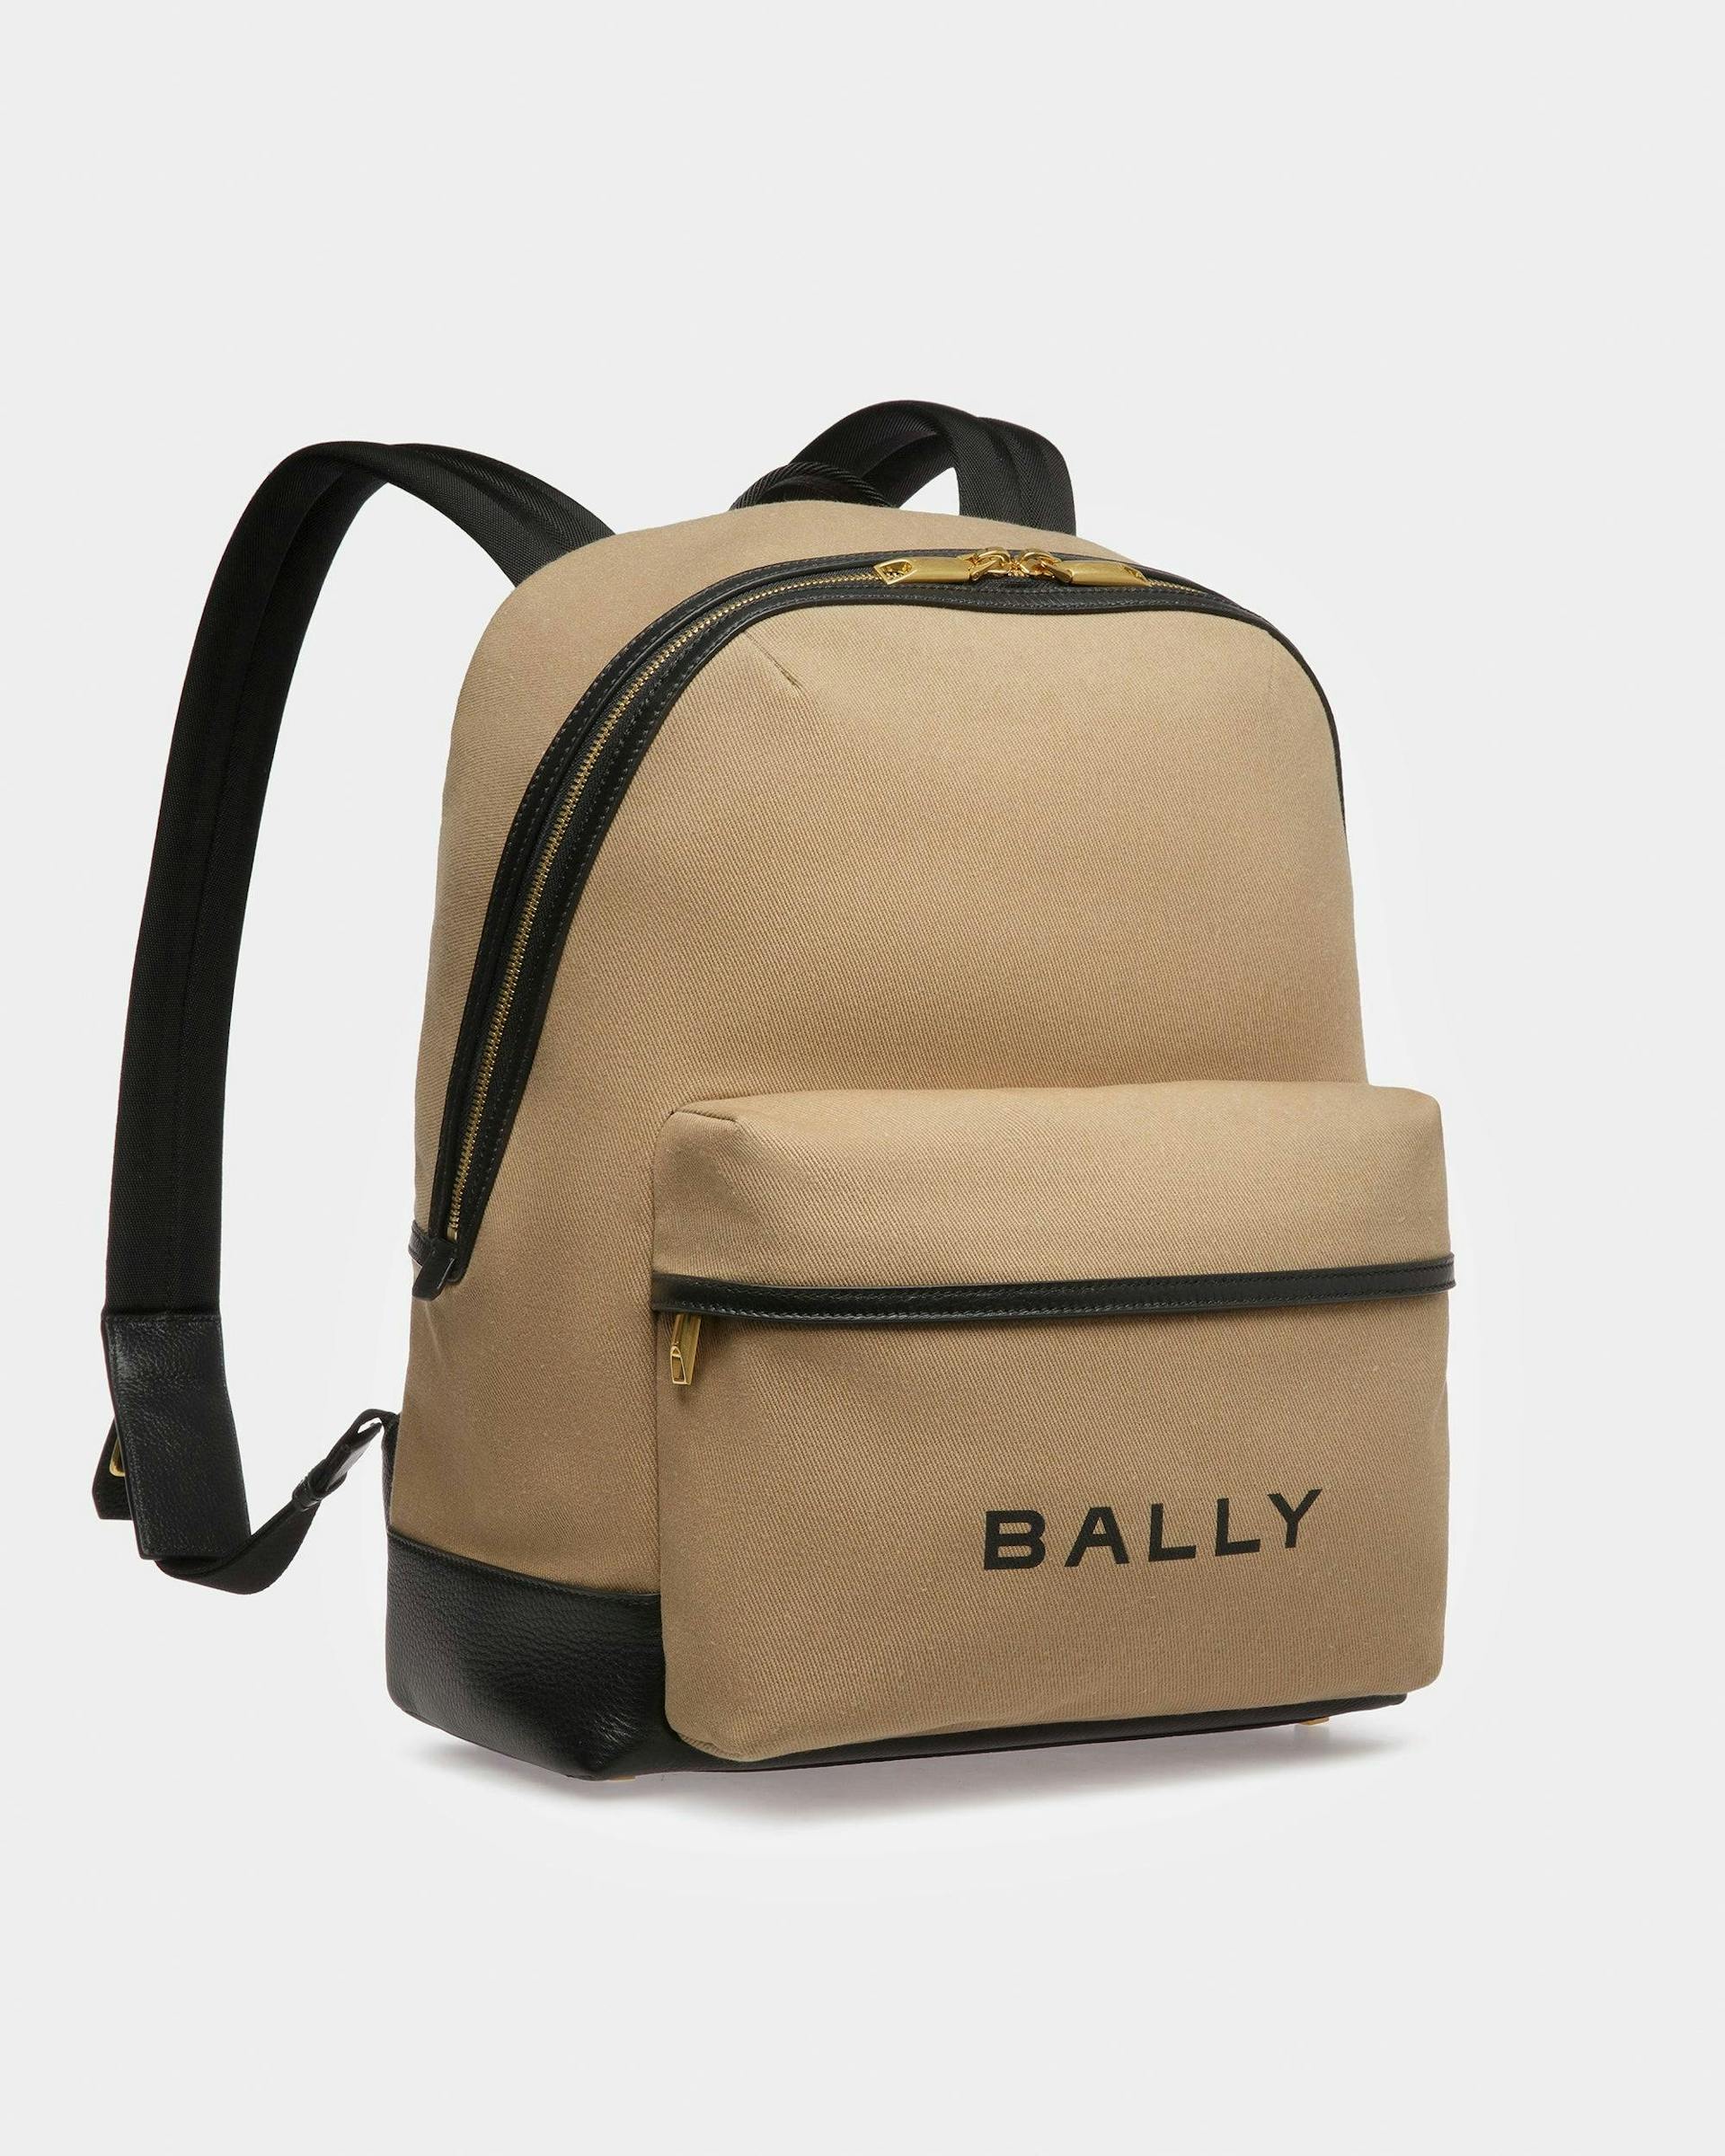 Bar Backpack In Sand And Black Fabric And Leather - Men's - Bally - 04